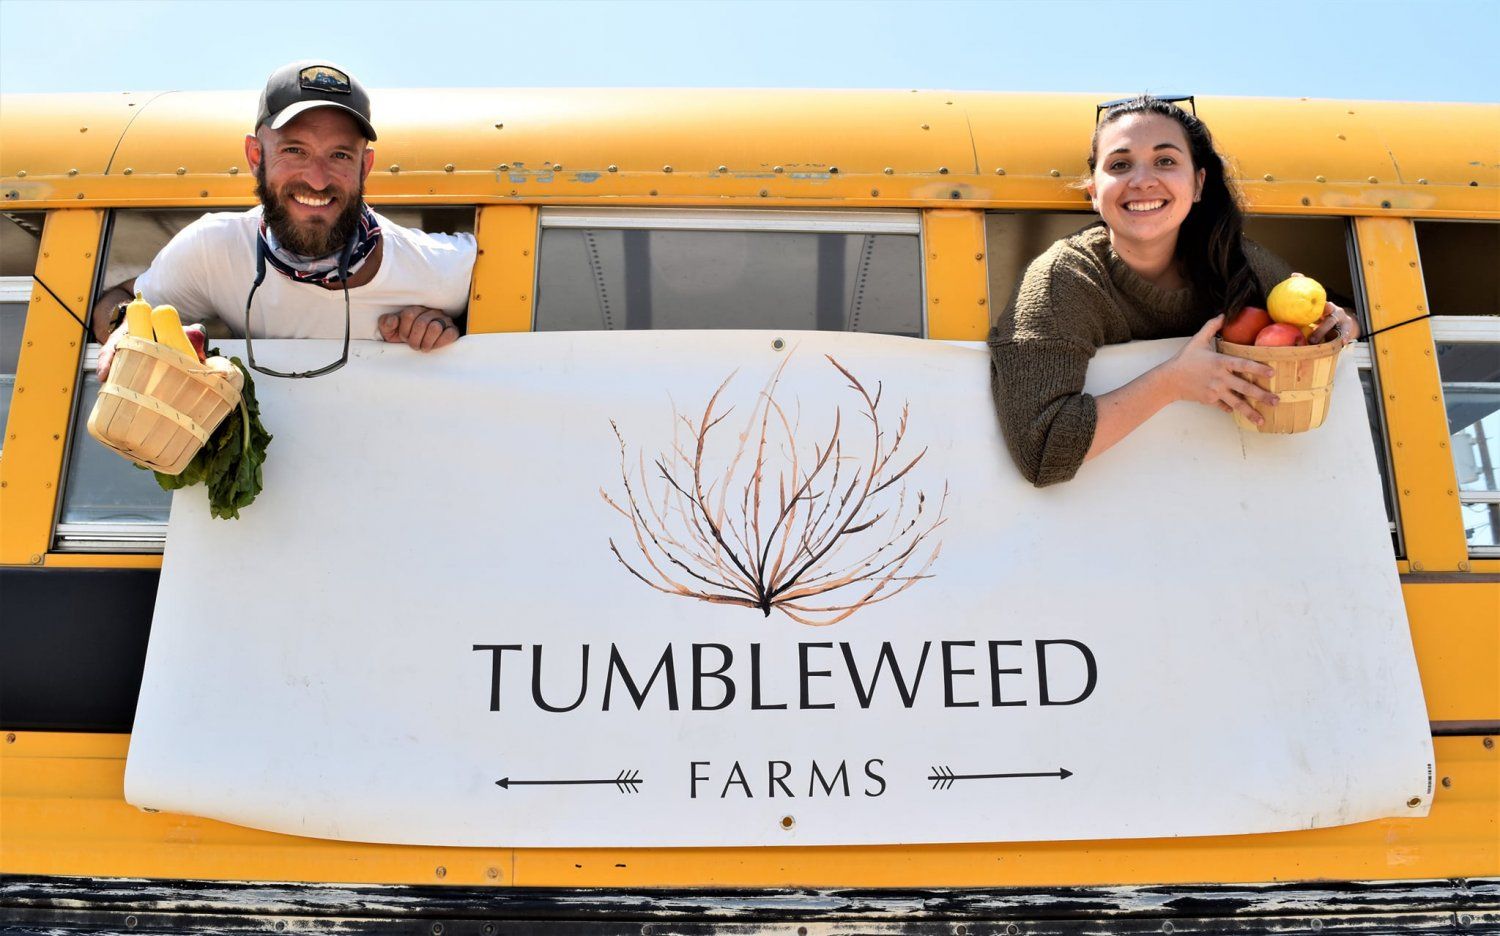 Previous Happening: Welcome 2021 Tumbleweed Farms Family